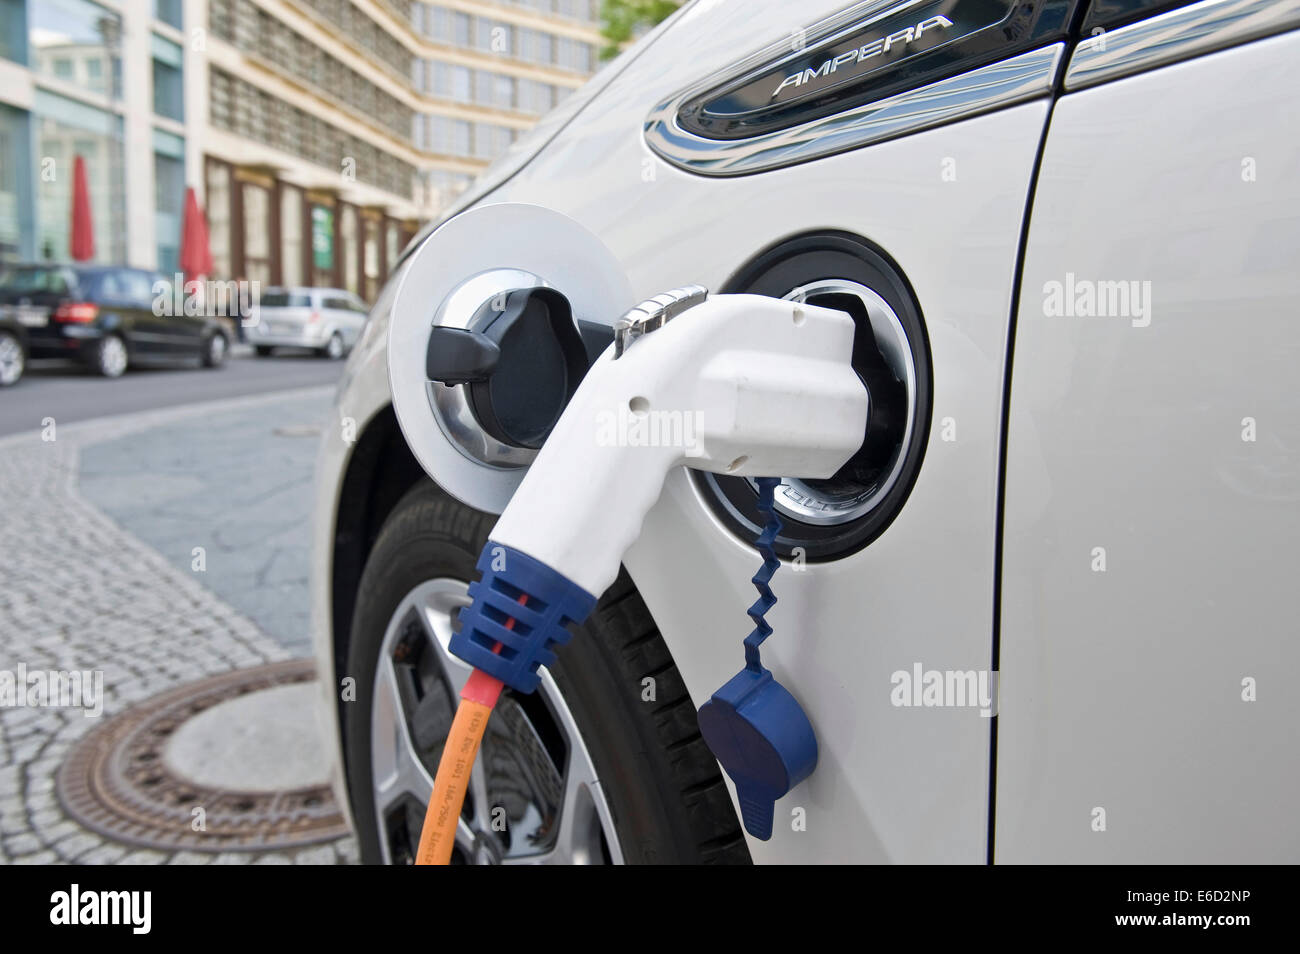 Electric car, Opel Ampera, at a charging station, Berlin, Germany Stock Photo